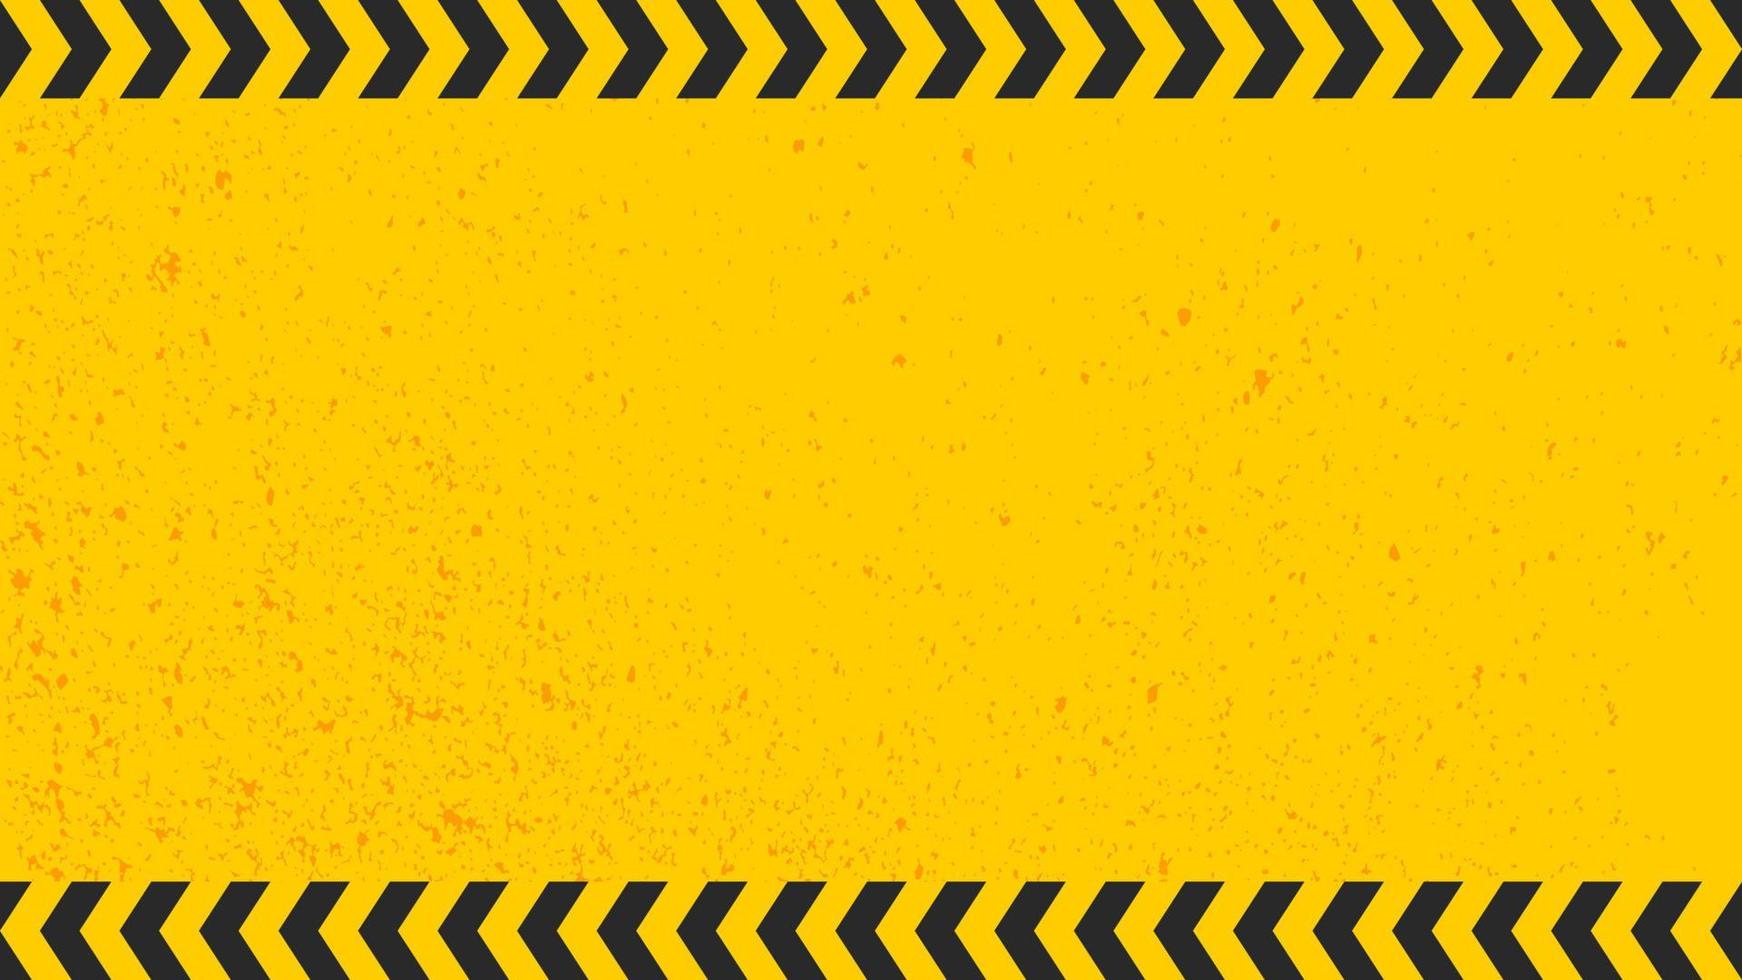 Construction Background with Grunge texture yellow and black template vector